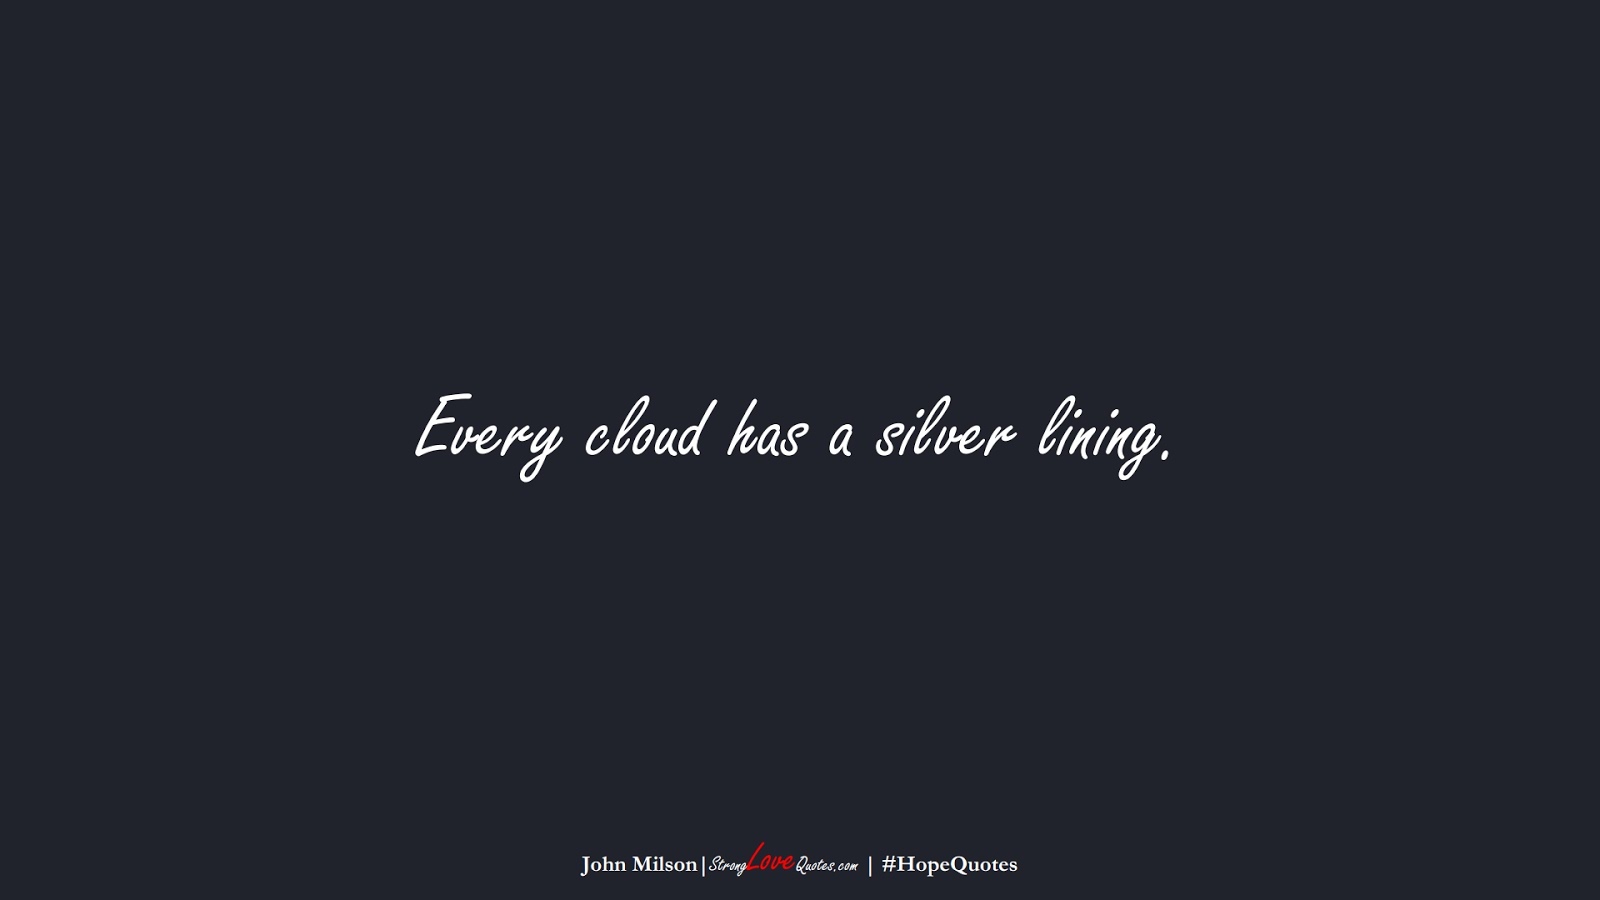 Every cloud has a silver lining. (John Milson);  #HopeQuotes